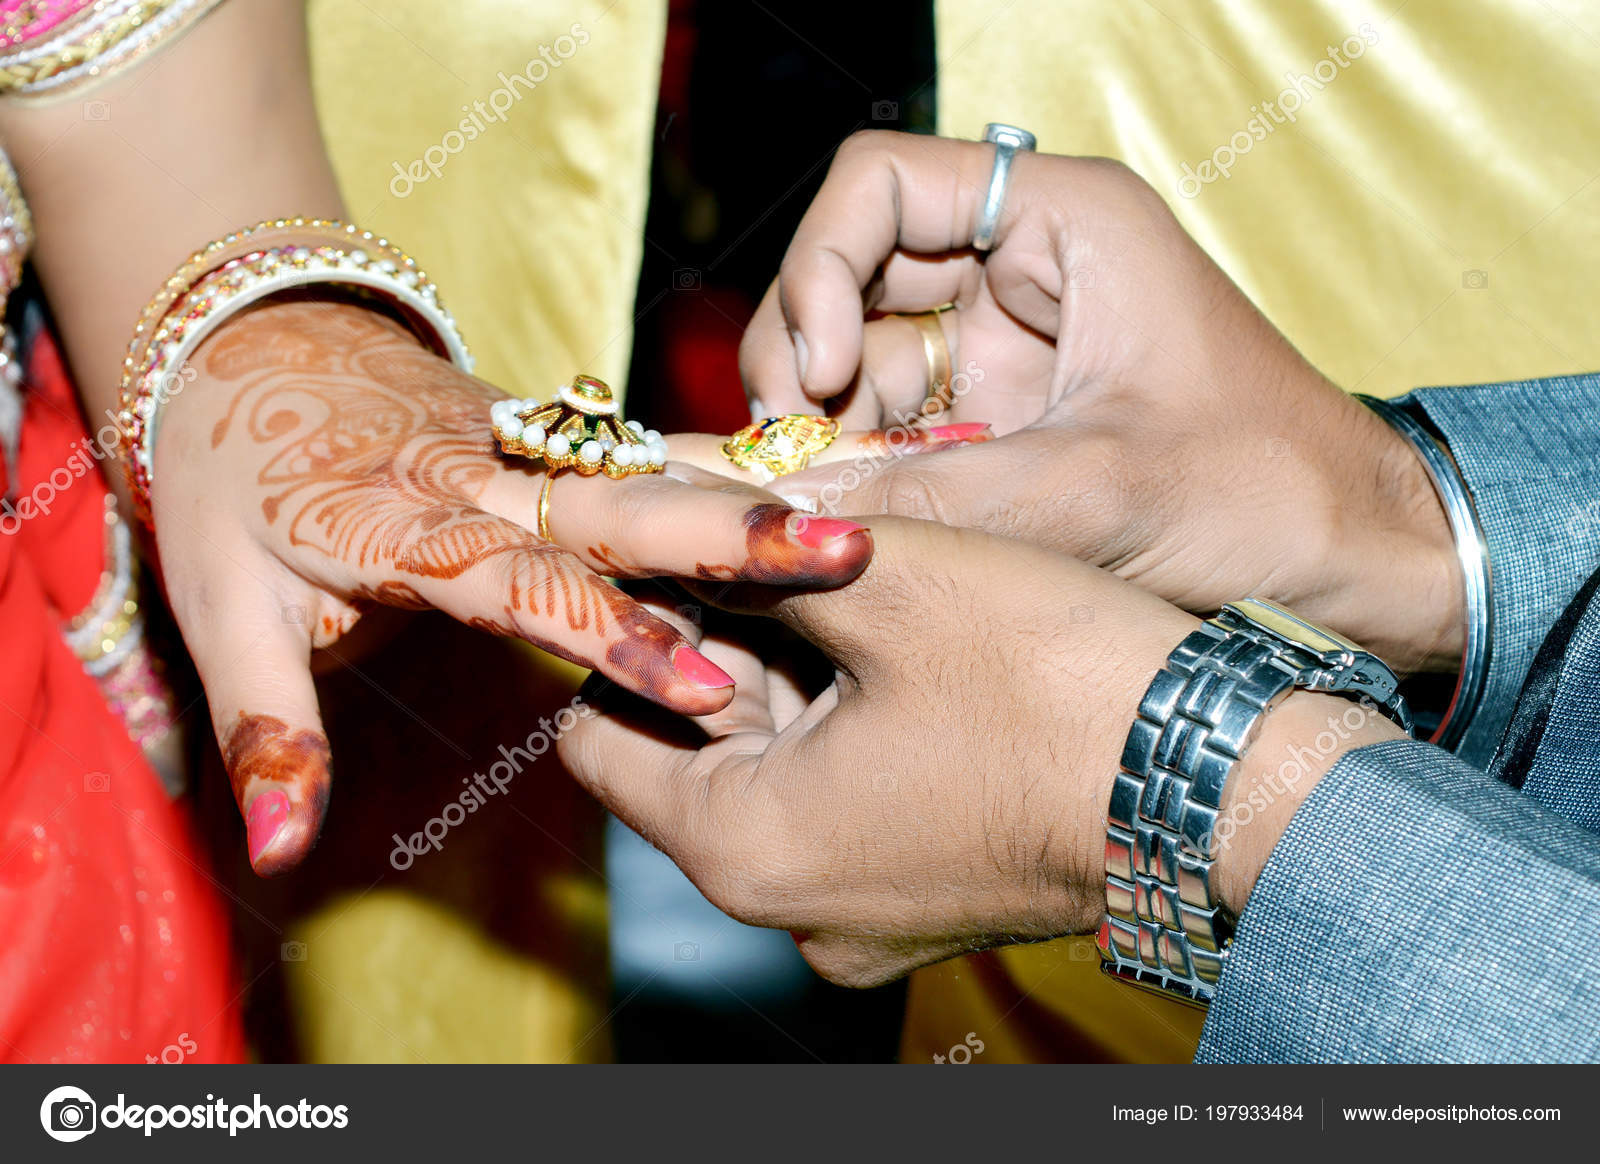 Indian Engagement and wedding rings shoot | Photo 118518